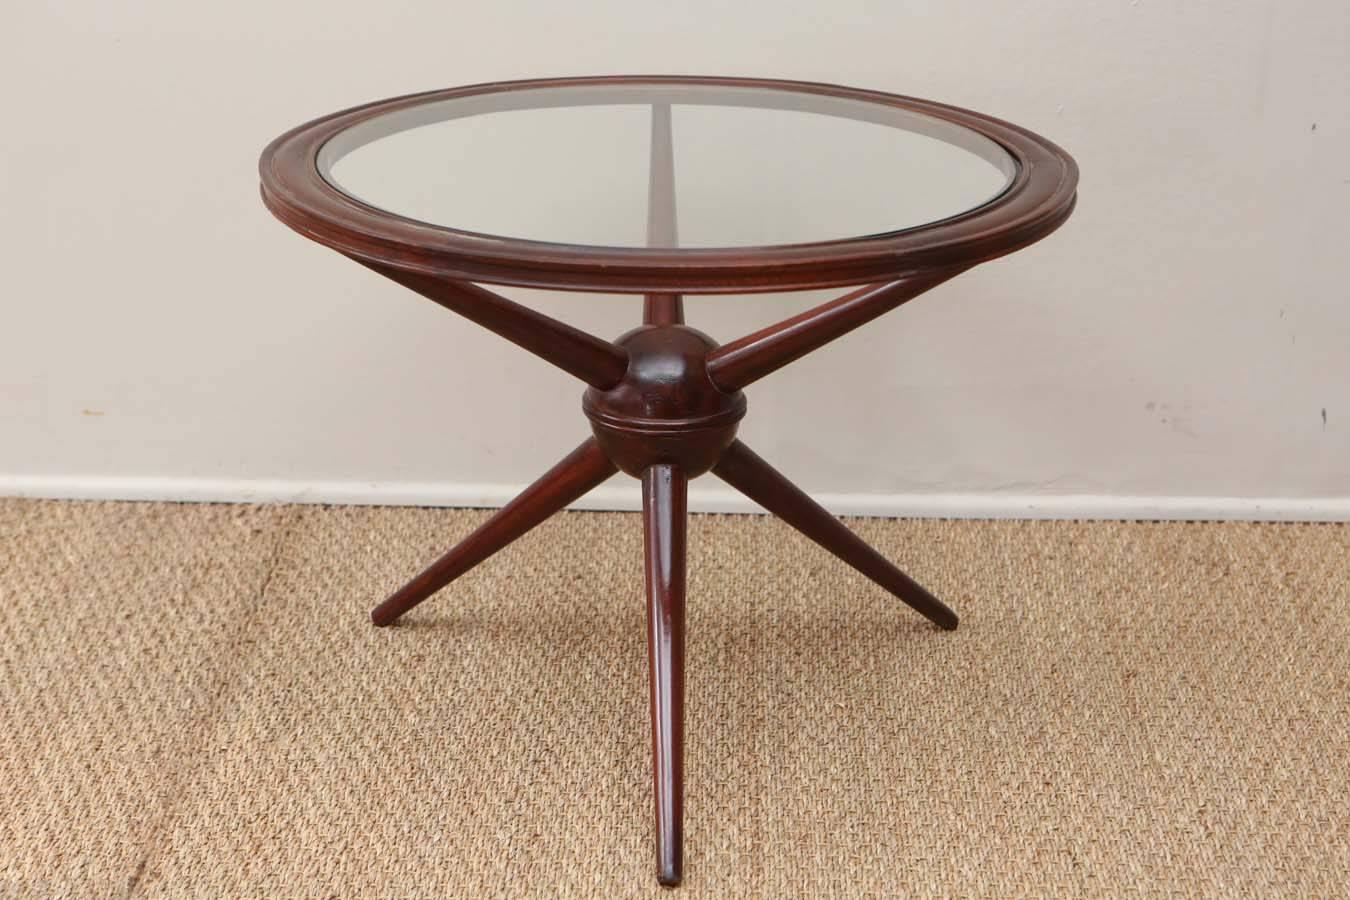 Wooden side table with glass inset top.